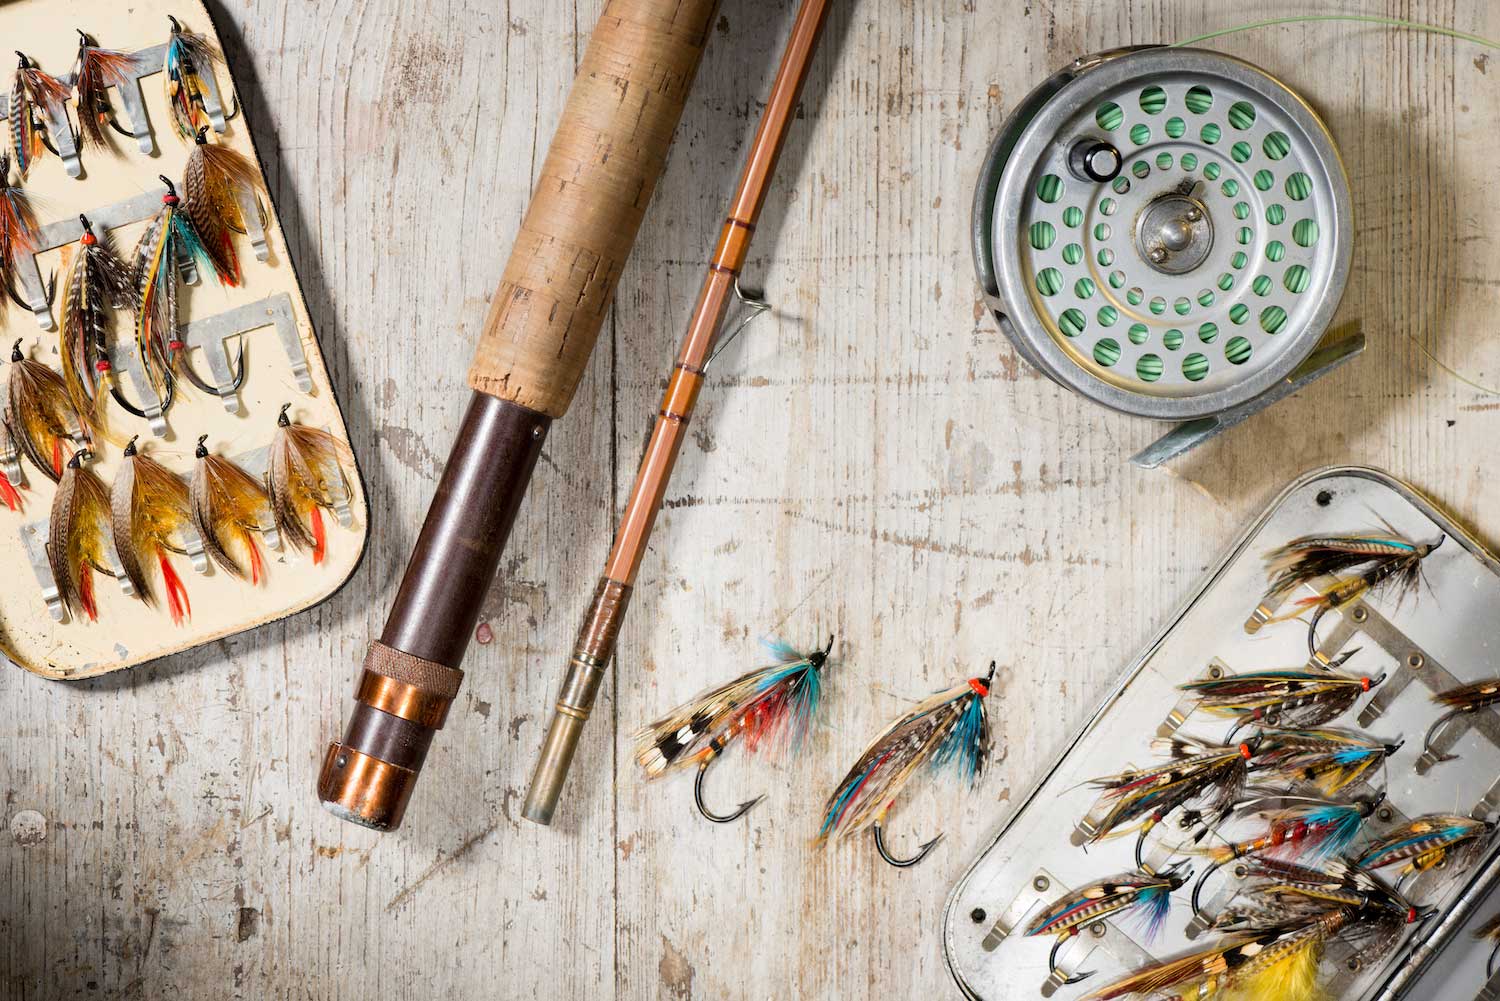 A collection of fly-fishing lures and other equipment.